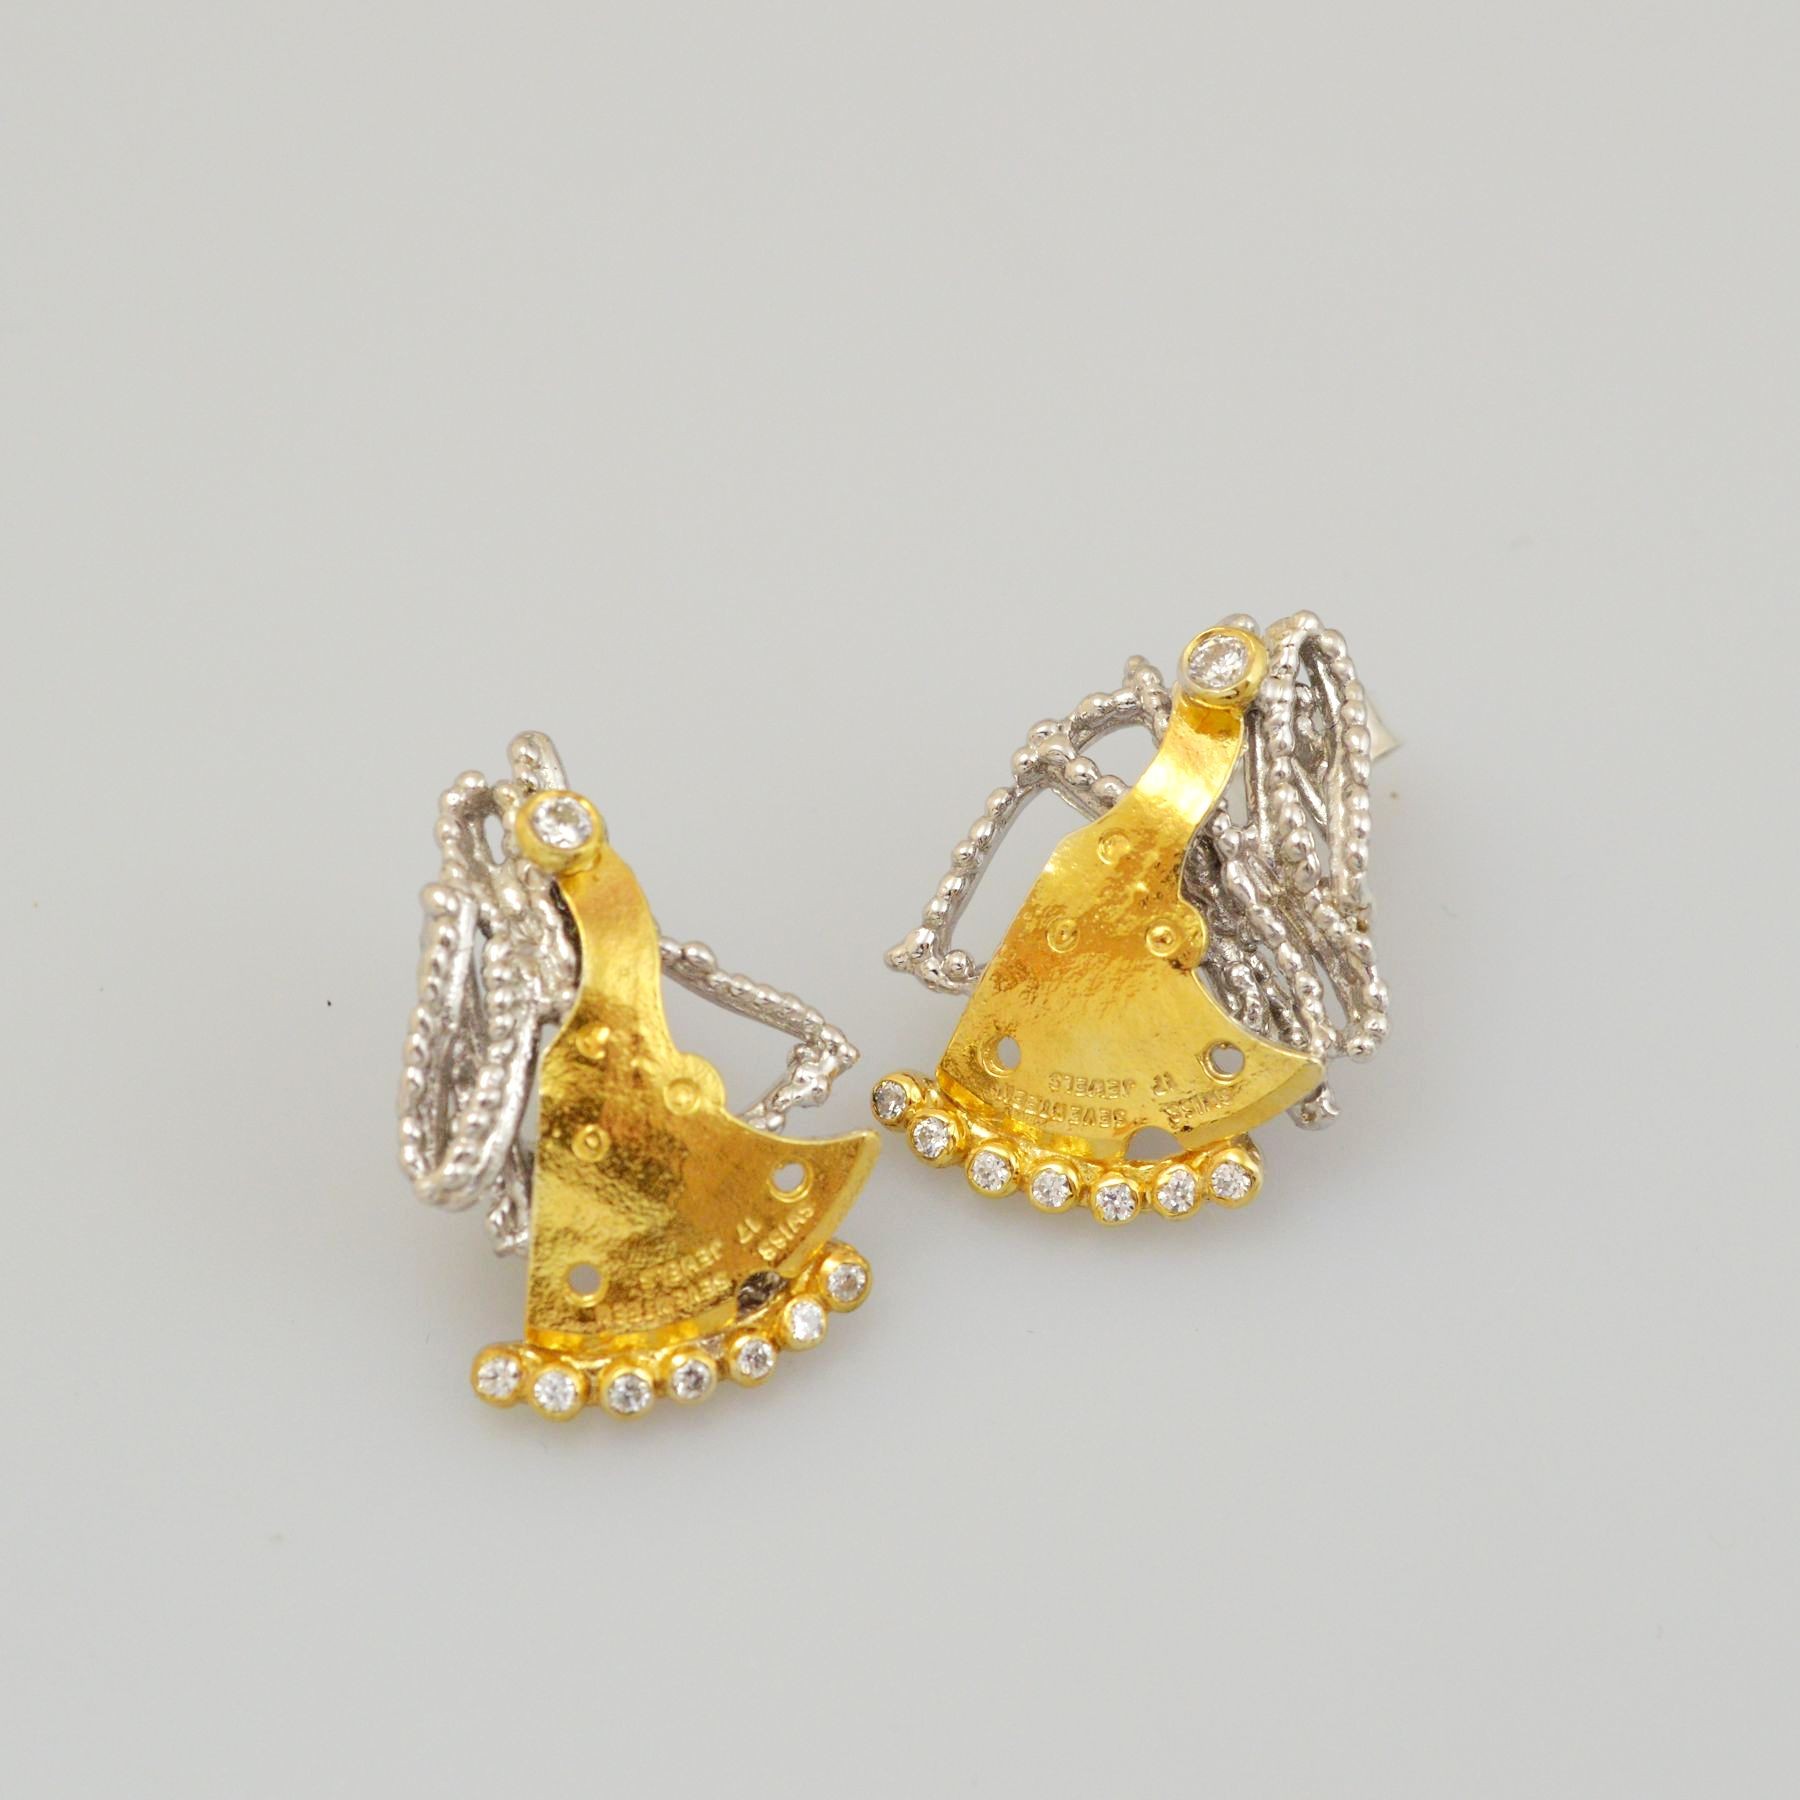 Silver earrings 925 rhodium and gold plated with synthetic stones